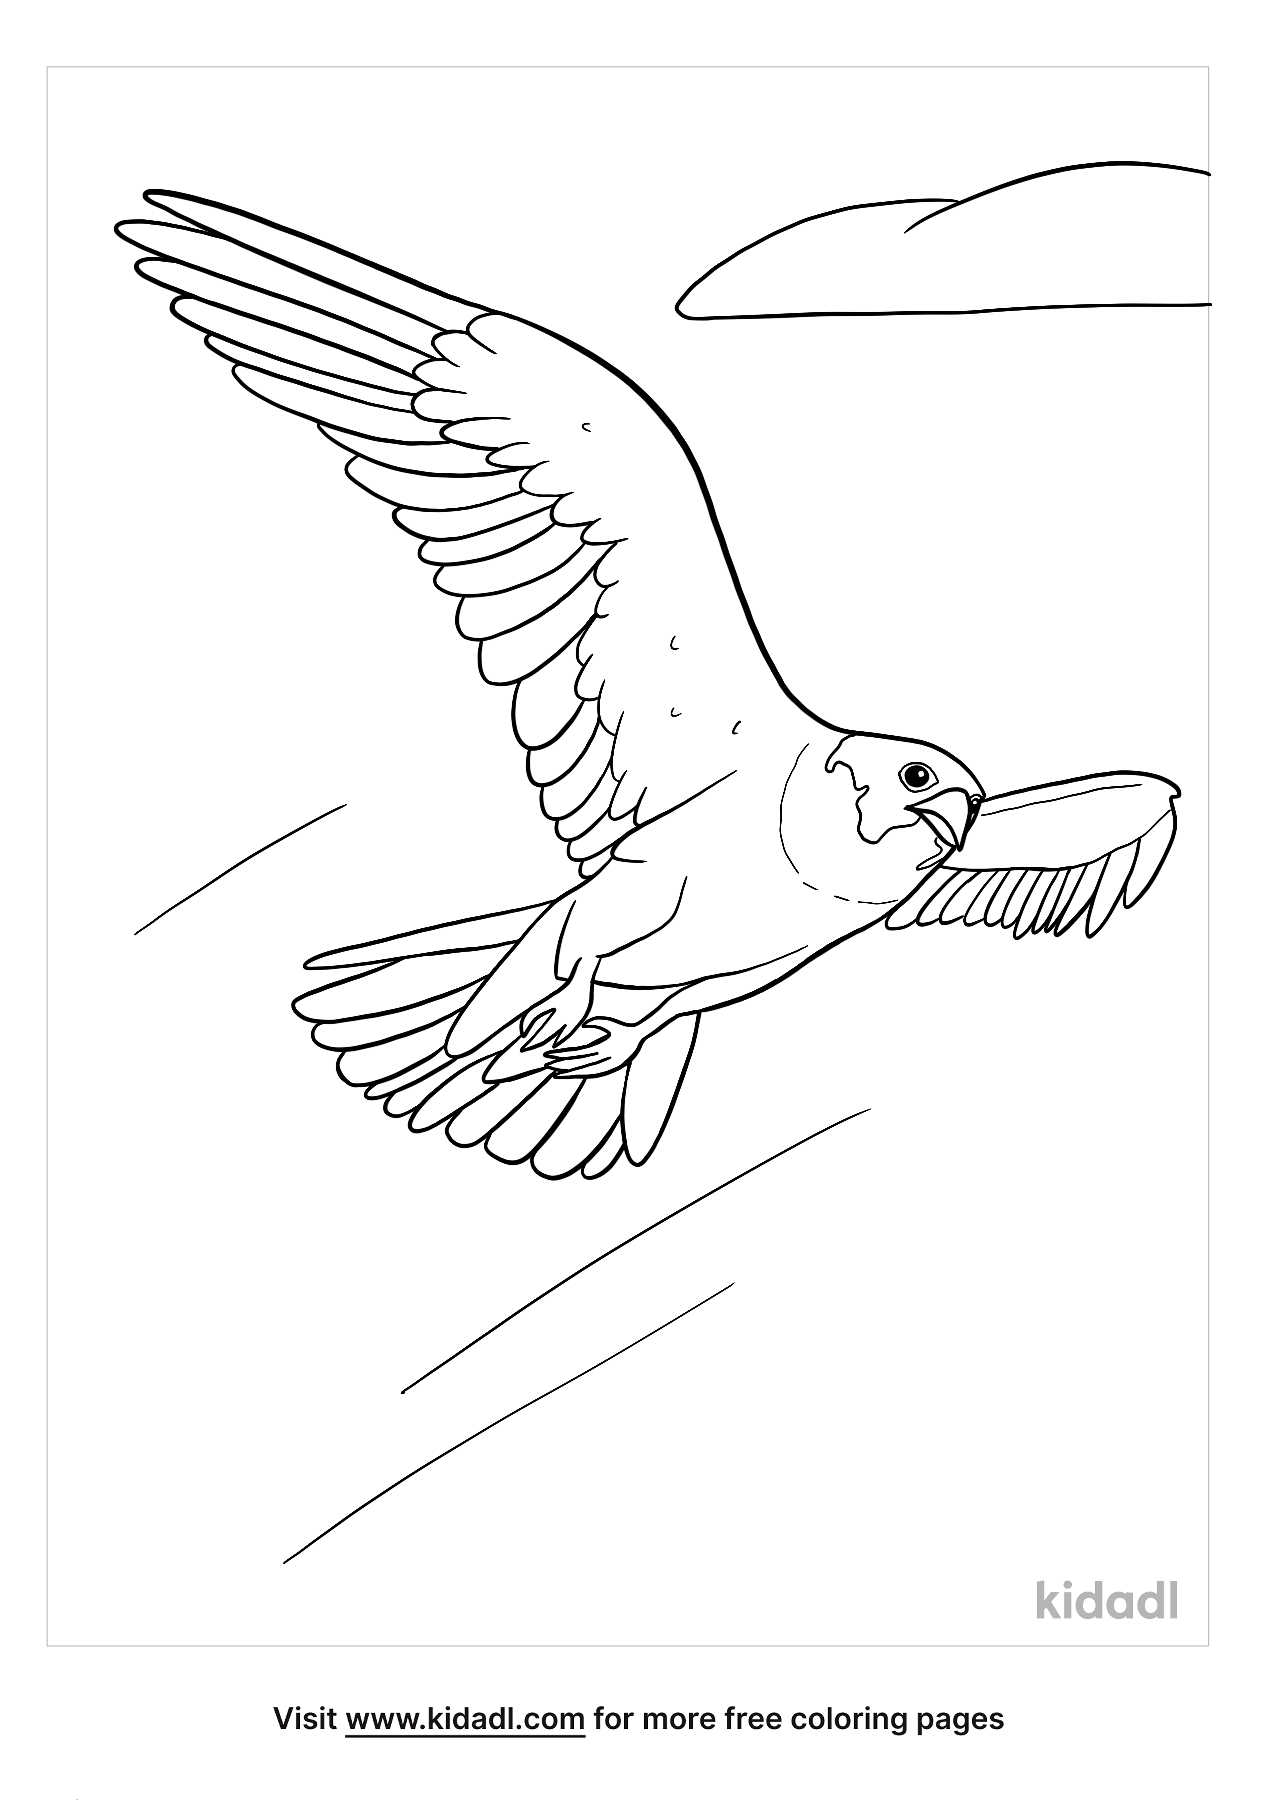 peregrine-falcon-coloring-pages-free-birds-coloring-pages-kidadl